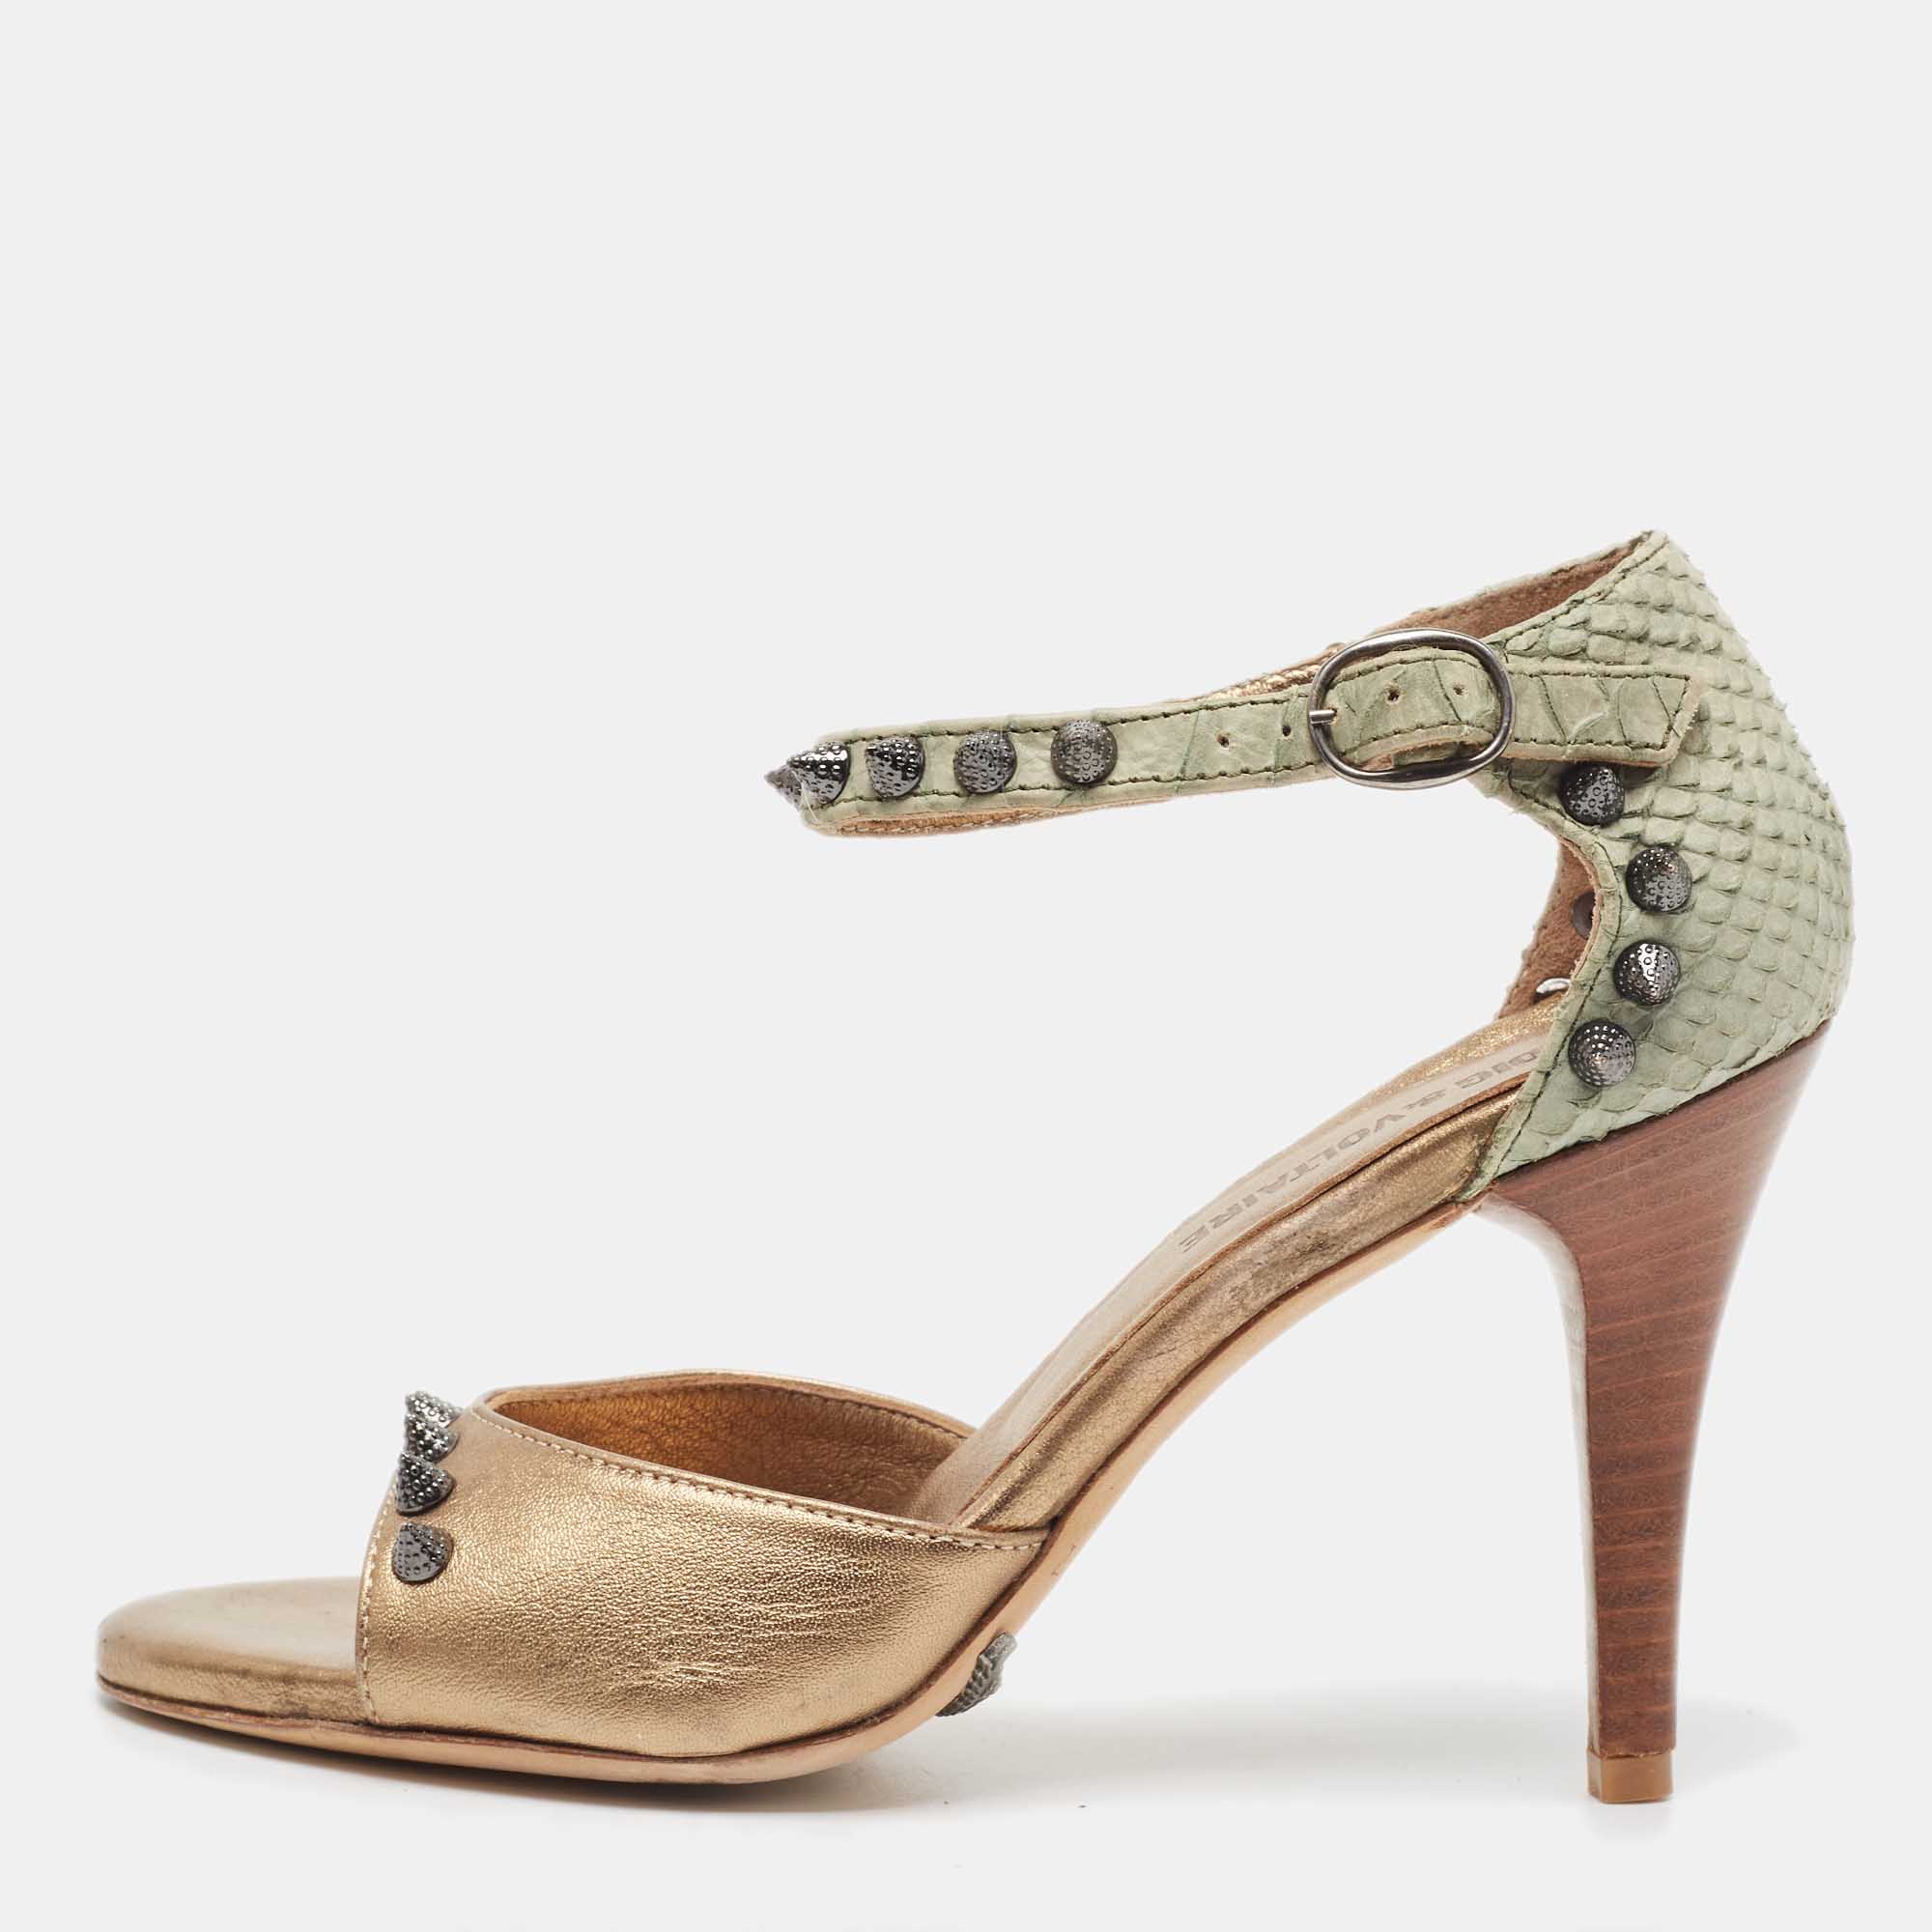 Zadig & Voltaire Two Tone Leather And Embossed Python Studded Ankle Strap Sandals Size 35